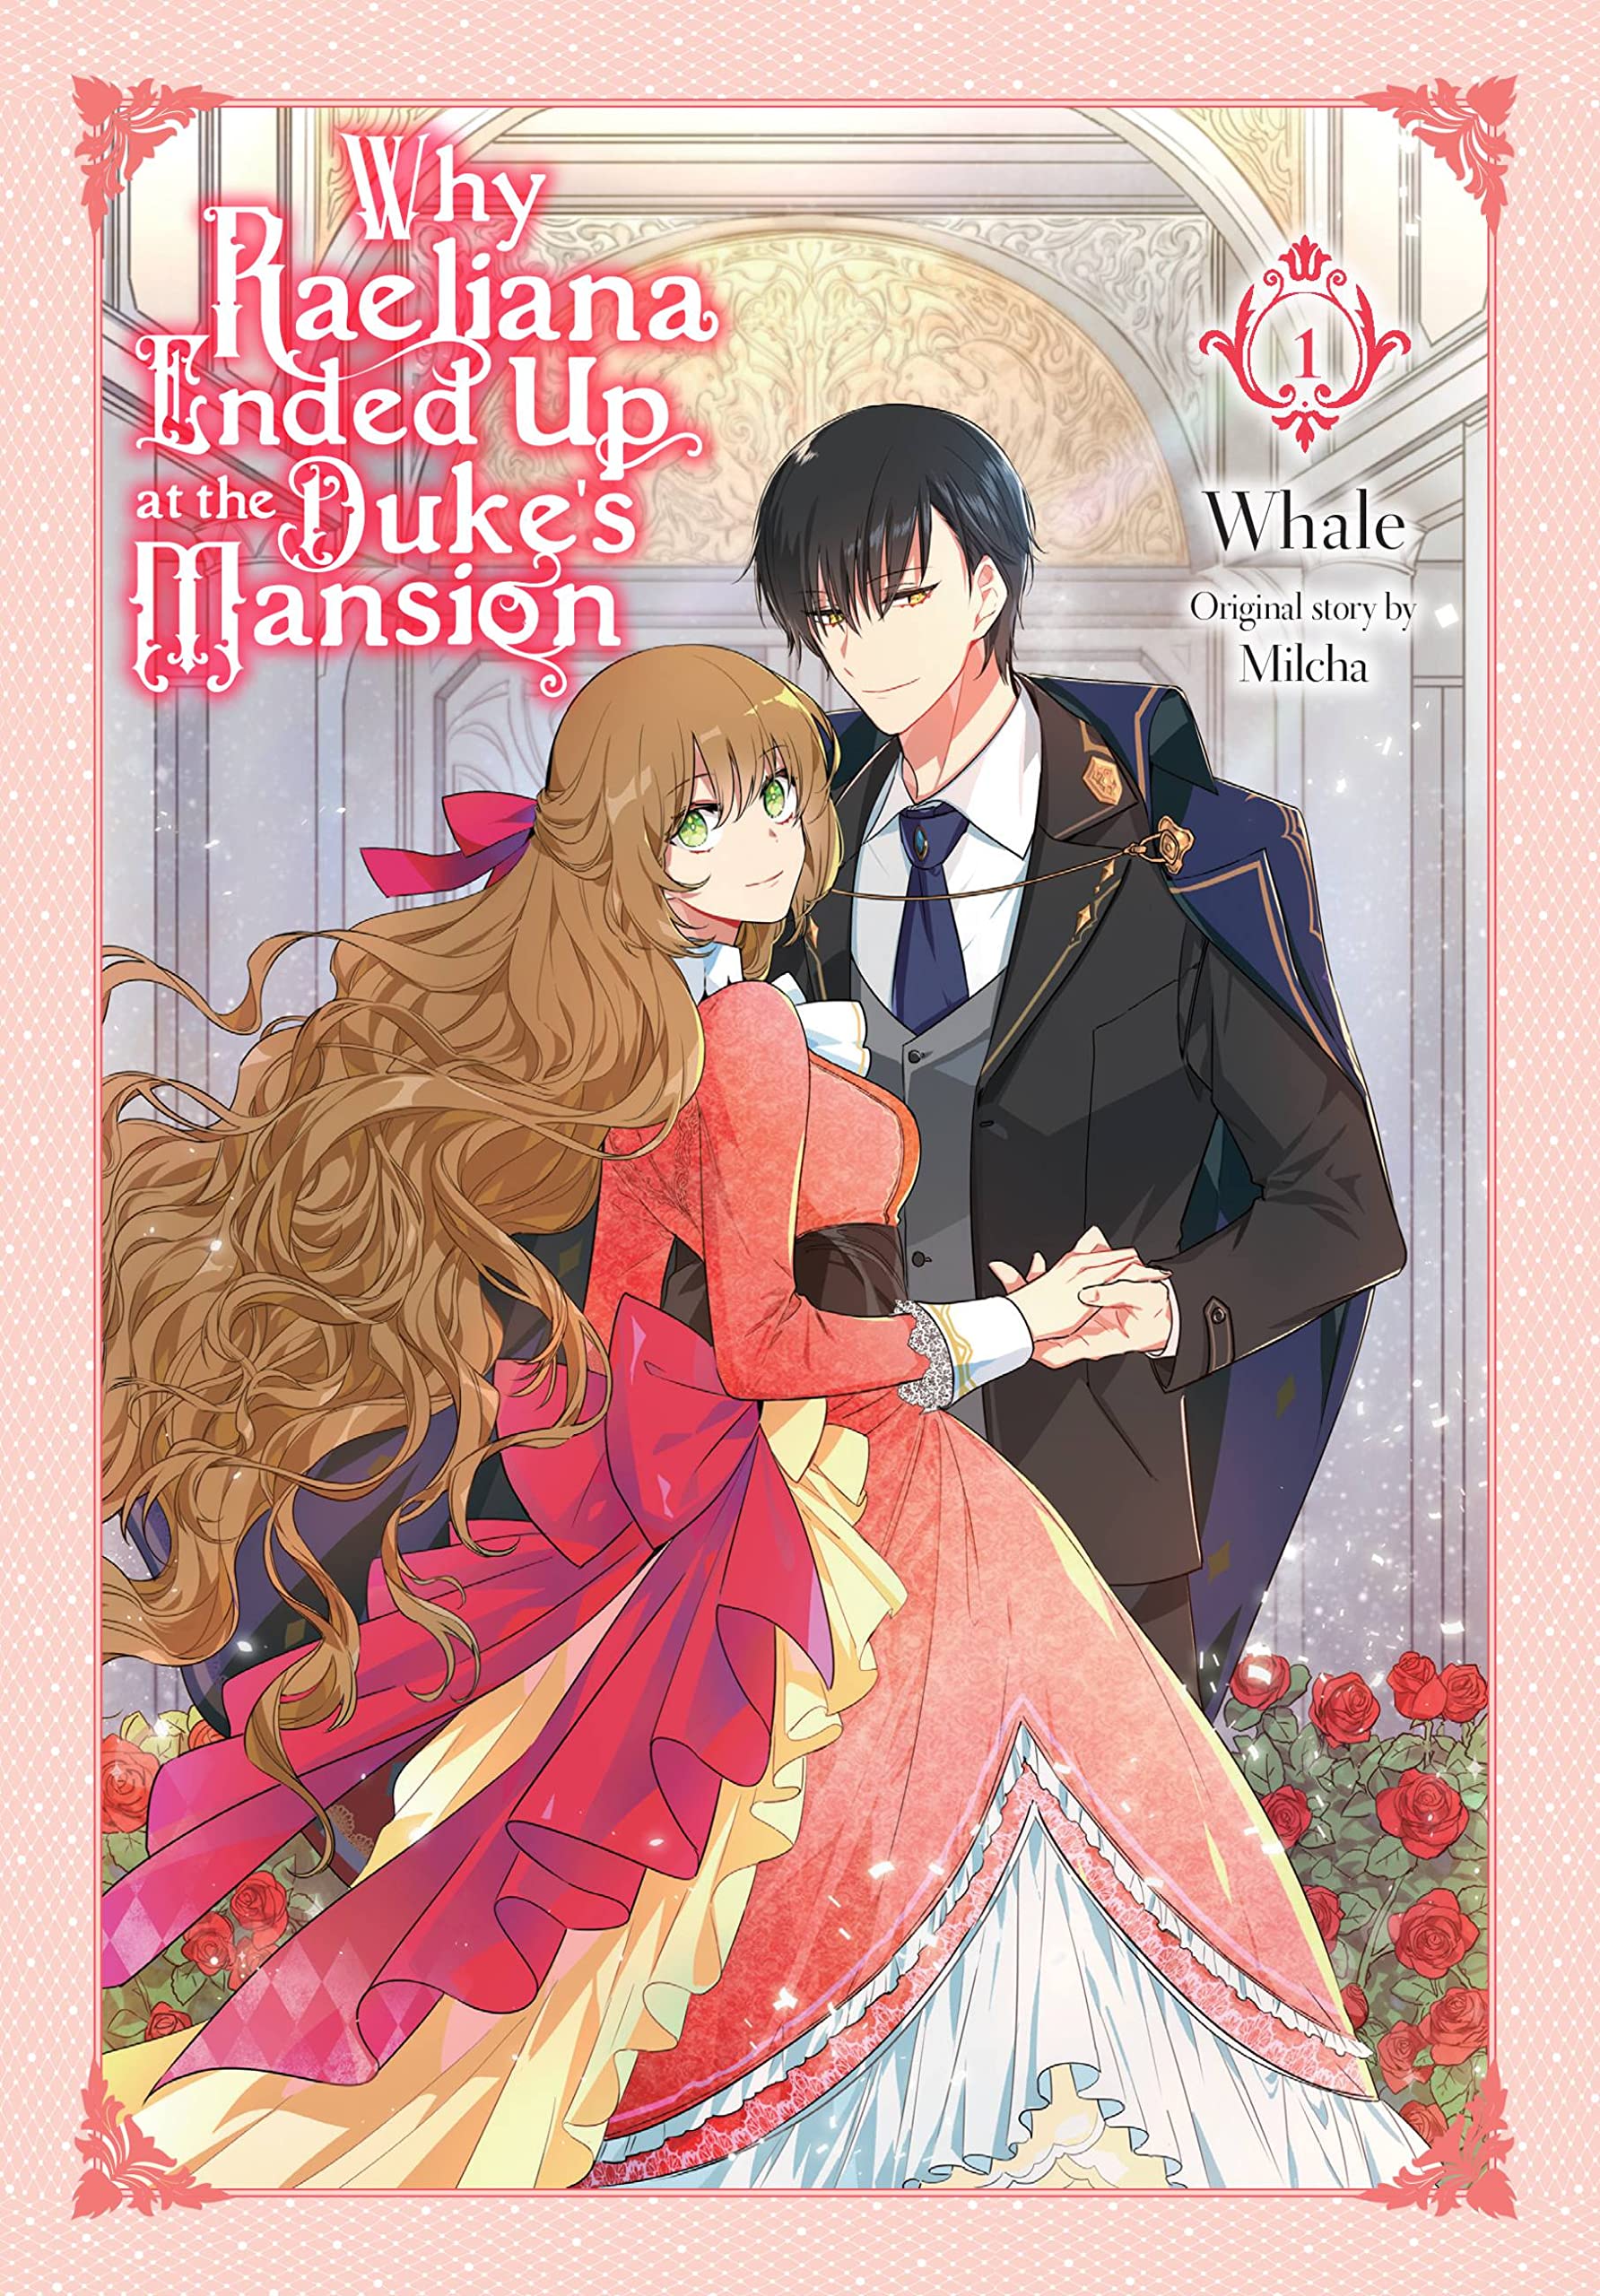 Why Raeliana Ended Up at the Duke's Mansion Vol. 01